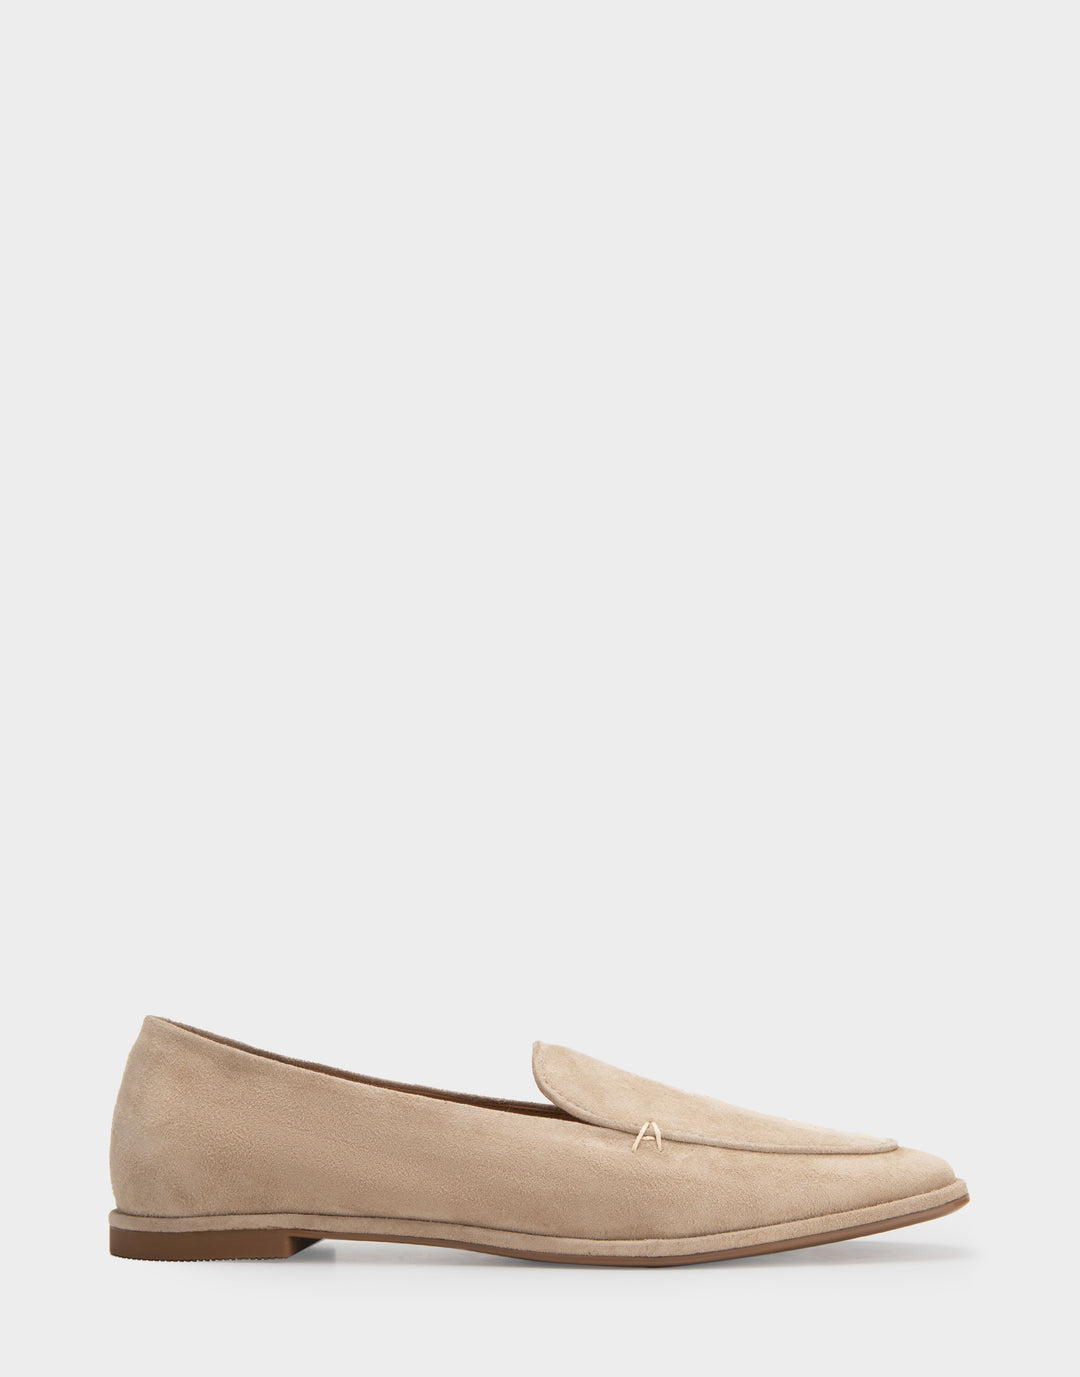 Neo - Comfortable Women’s Loafer In Tan Suede